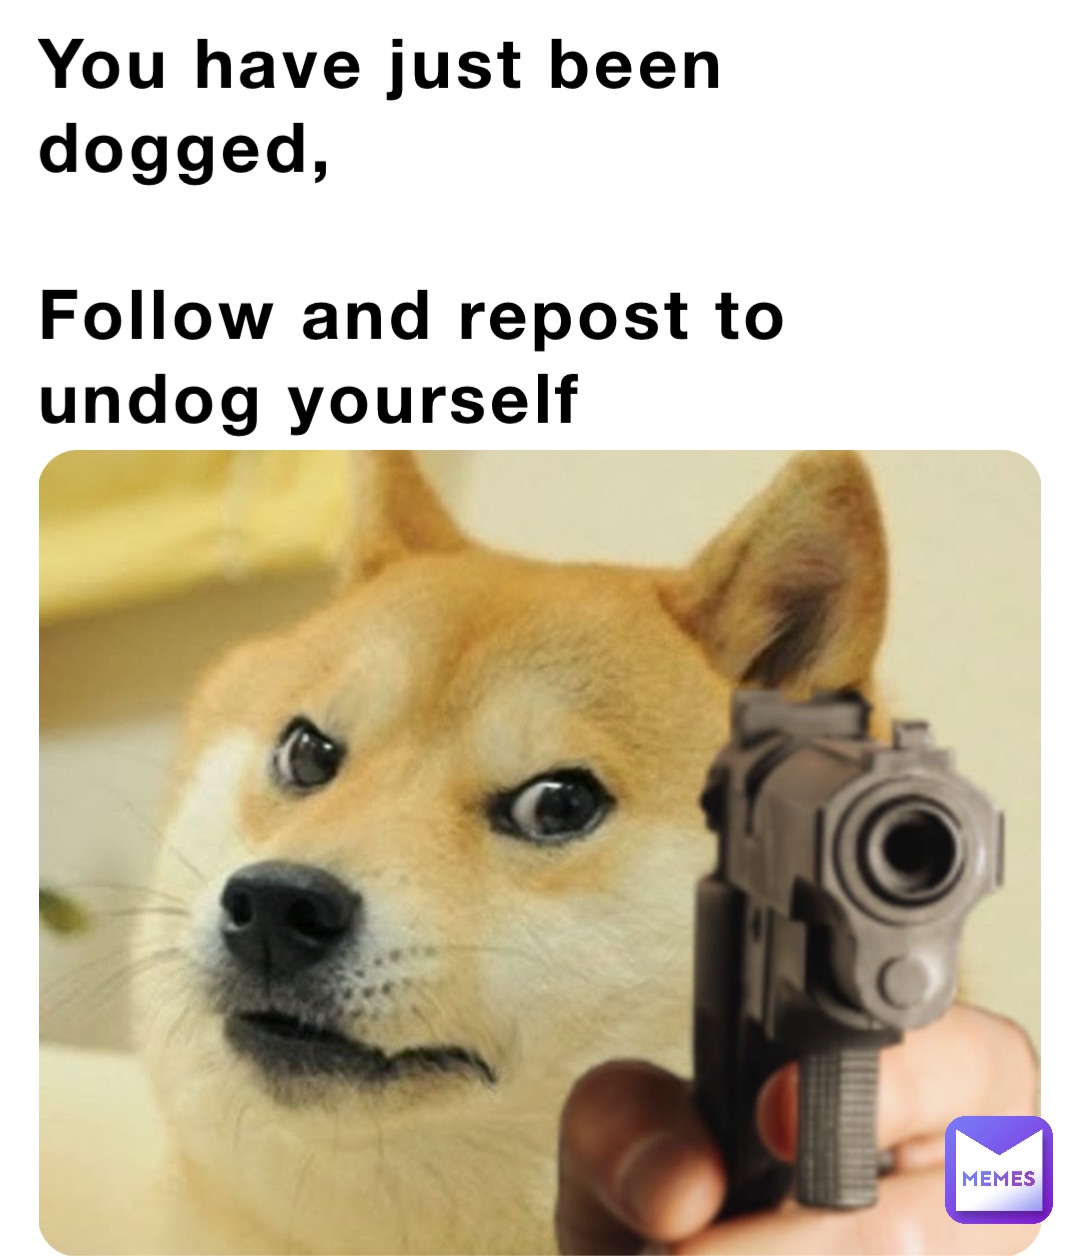 You have just been dogged, 

Follow and repost to undog yourself